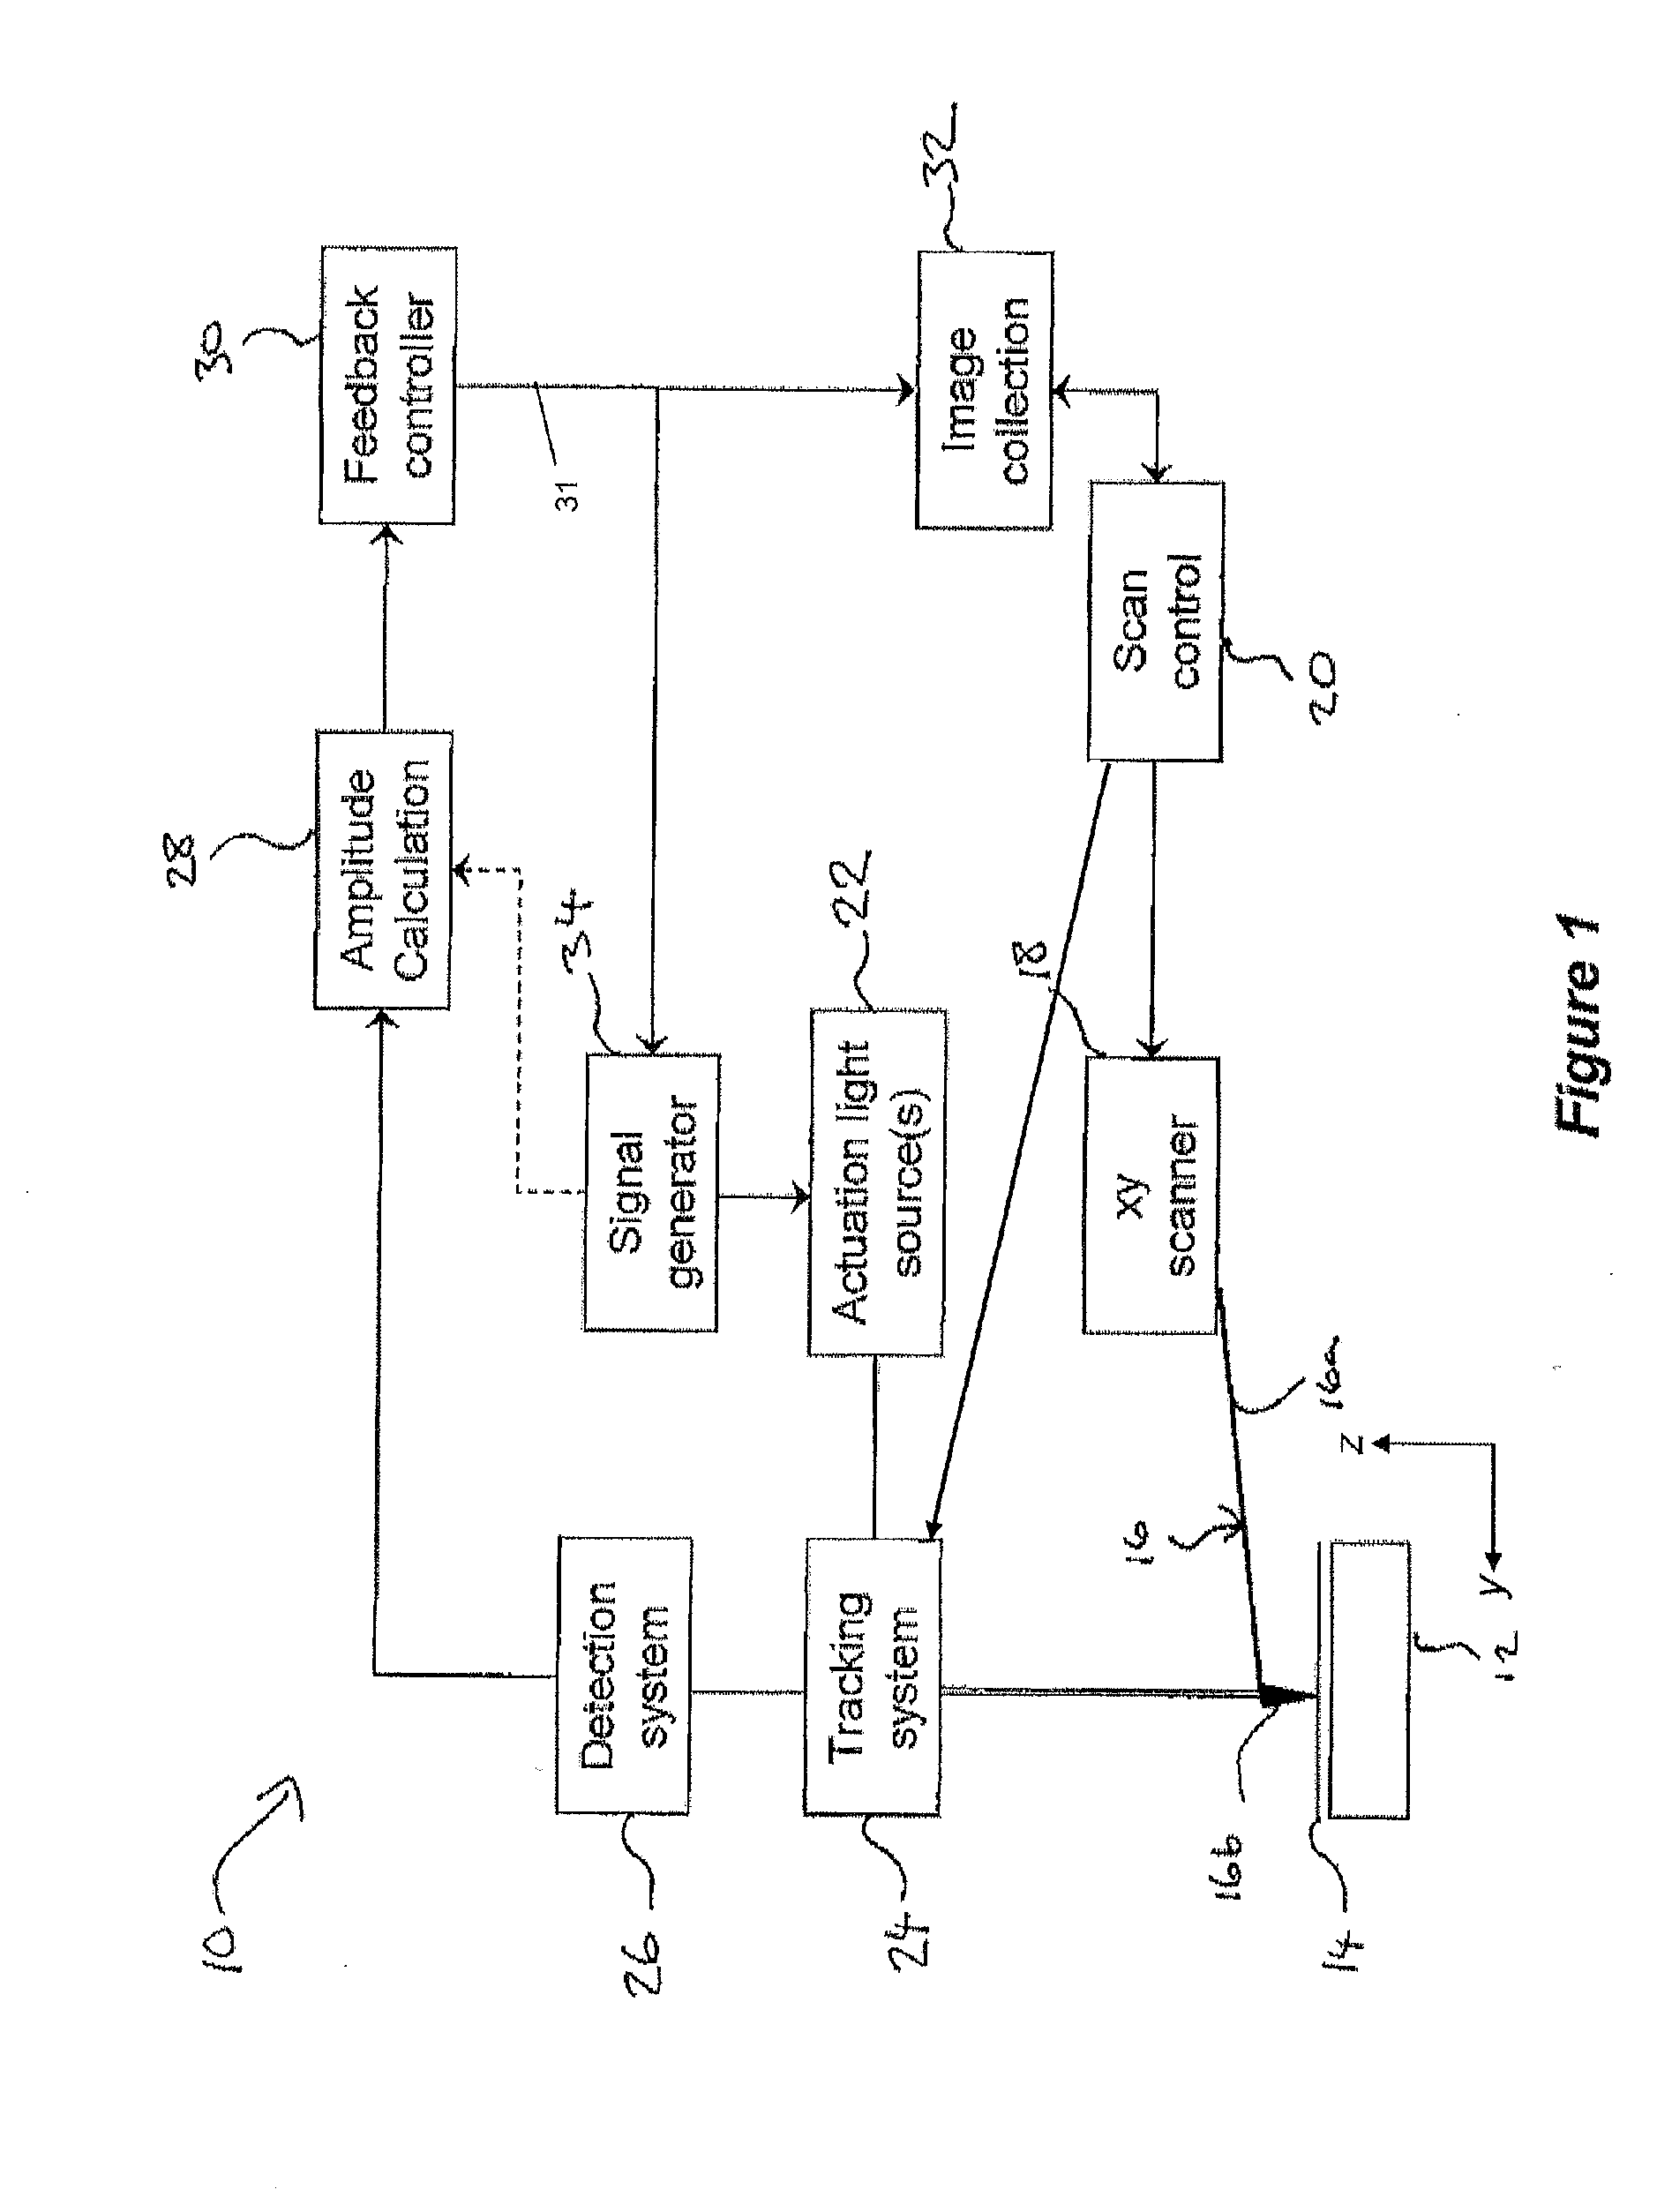 Photothermal actuation of a probe for scanning probe microscopy